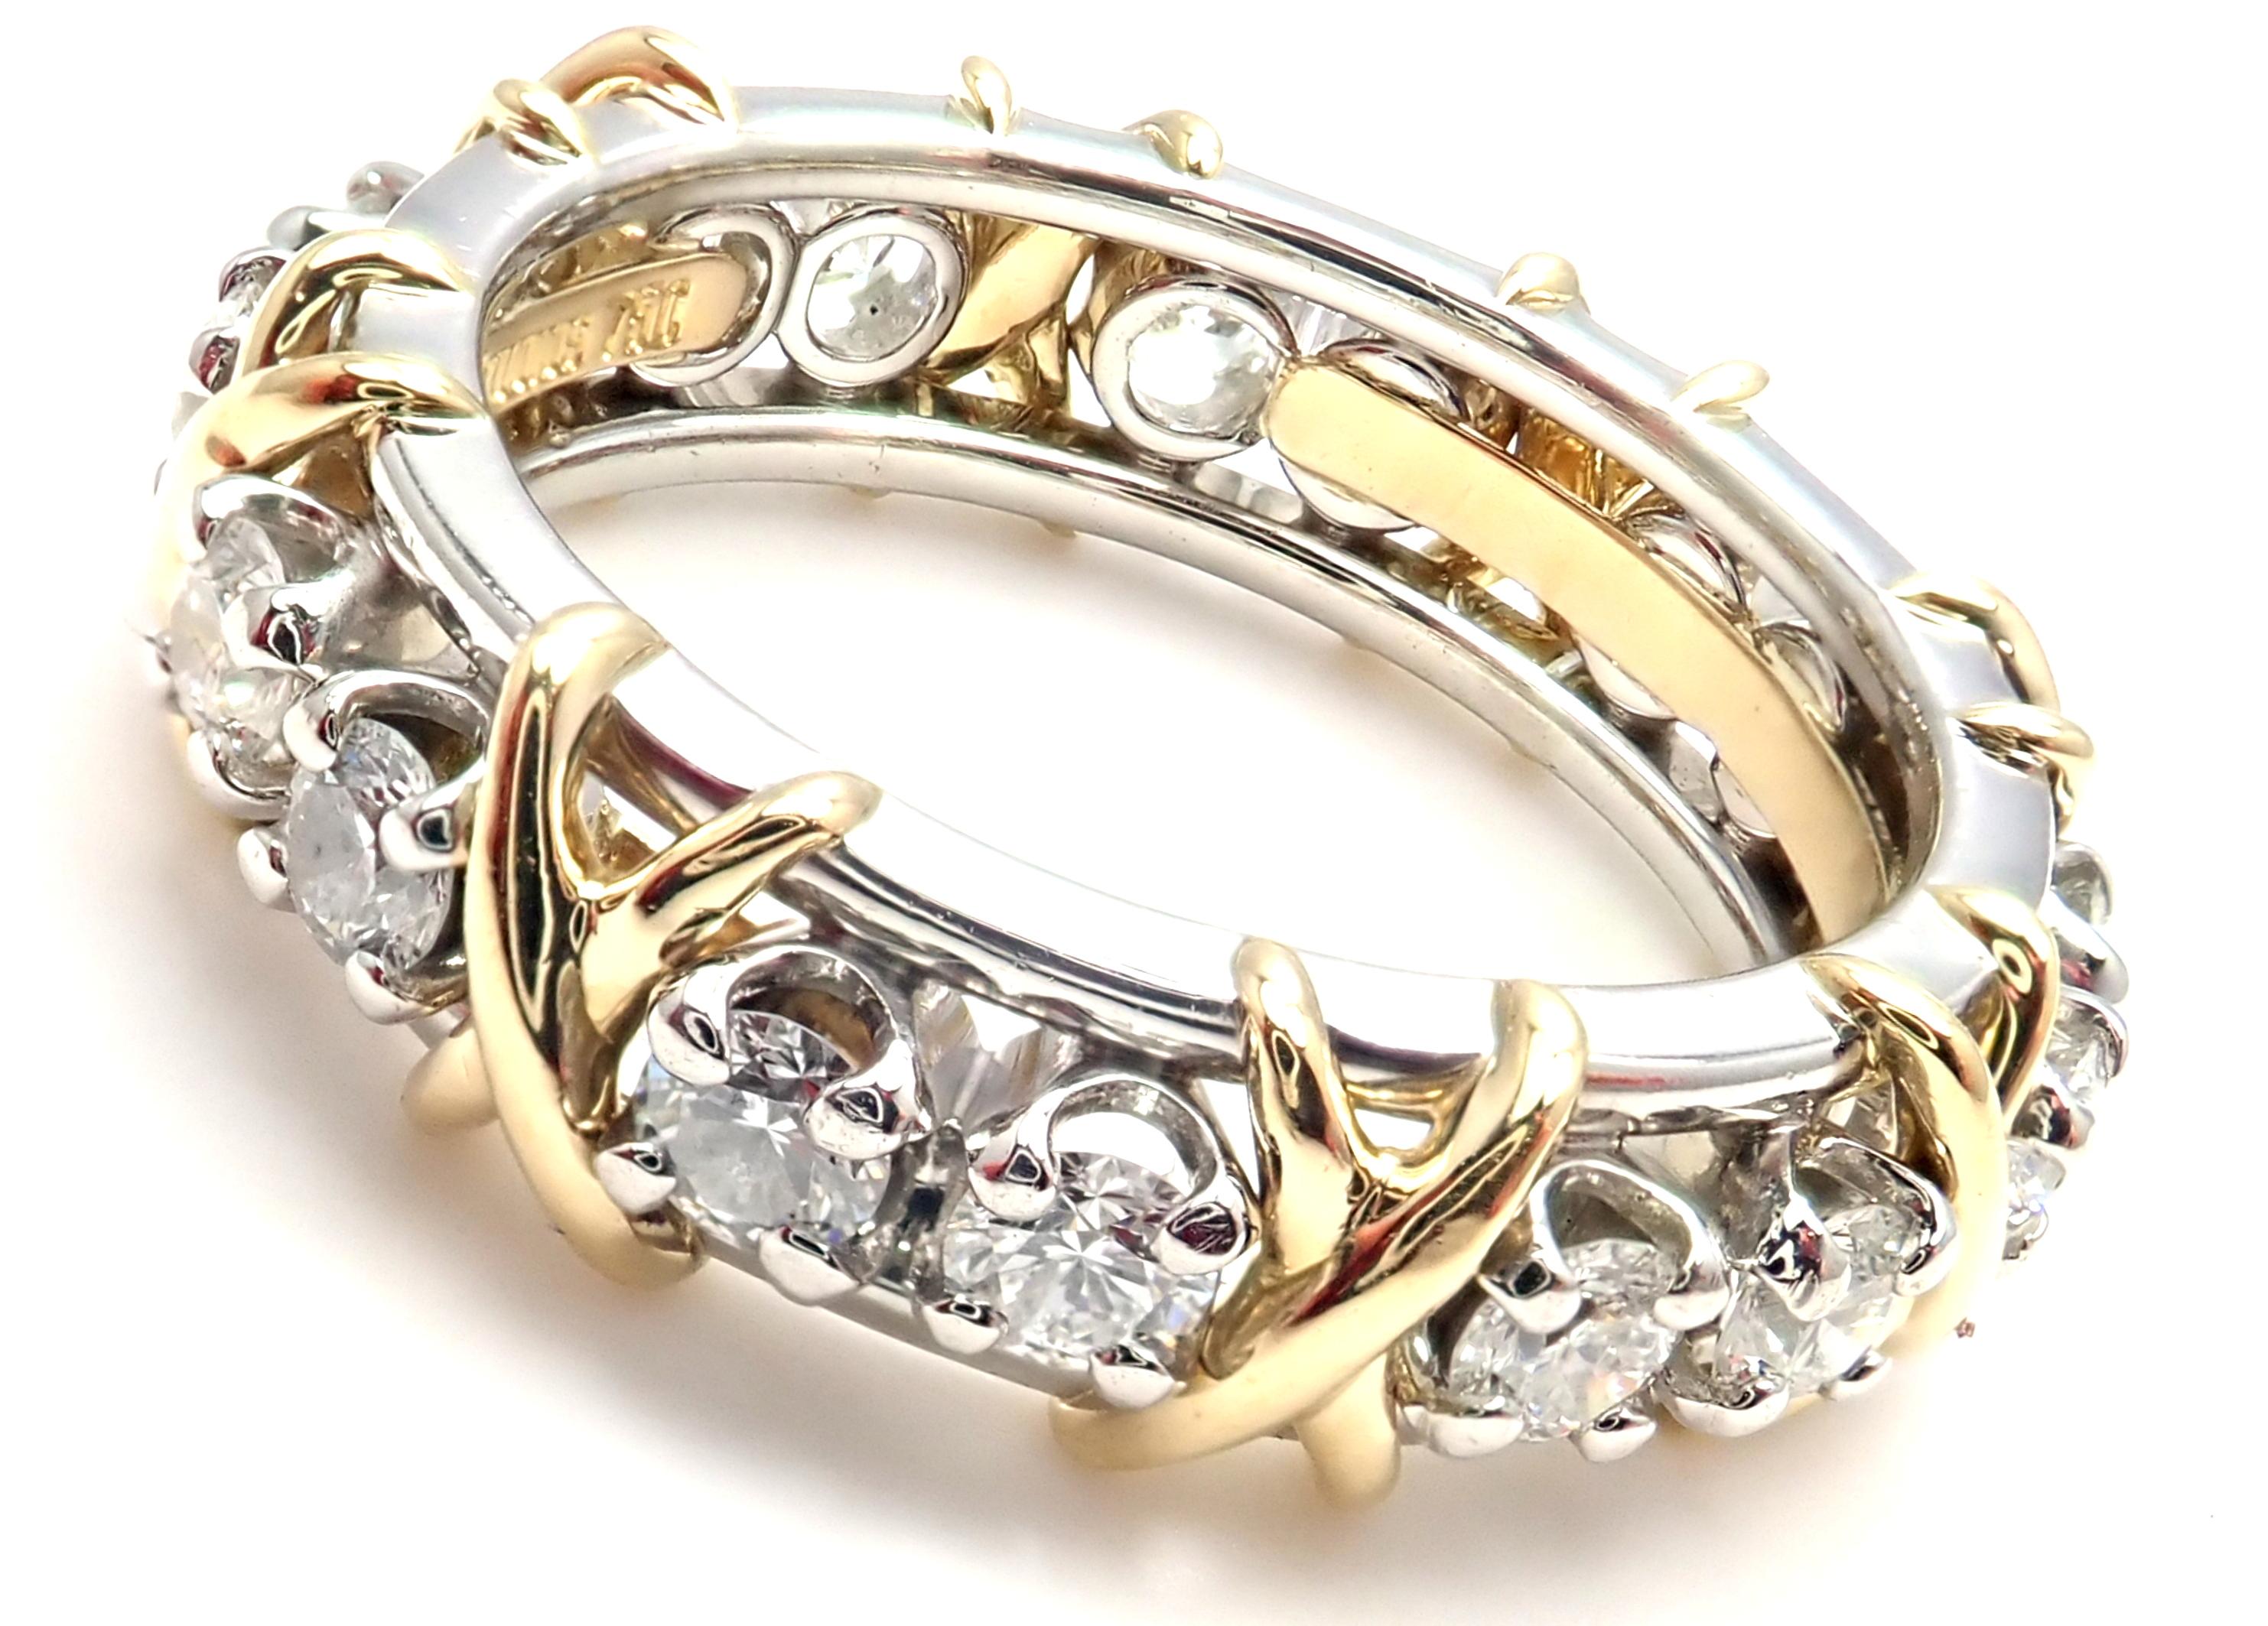 Tiffany & Co. Jean Schlumberger Yellow Gold and Platinum Diamond Ring 3